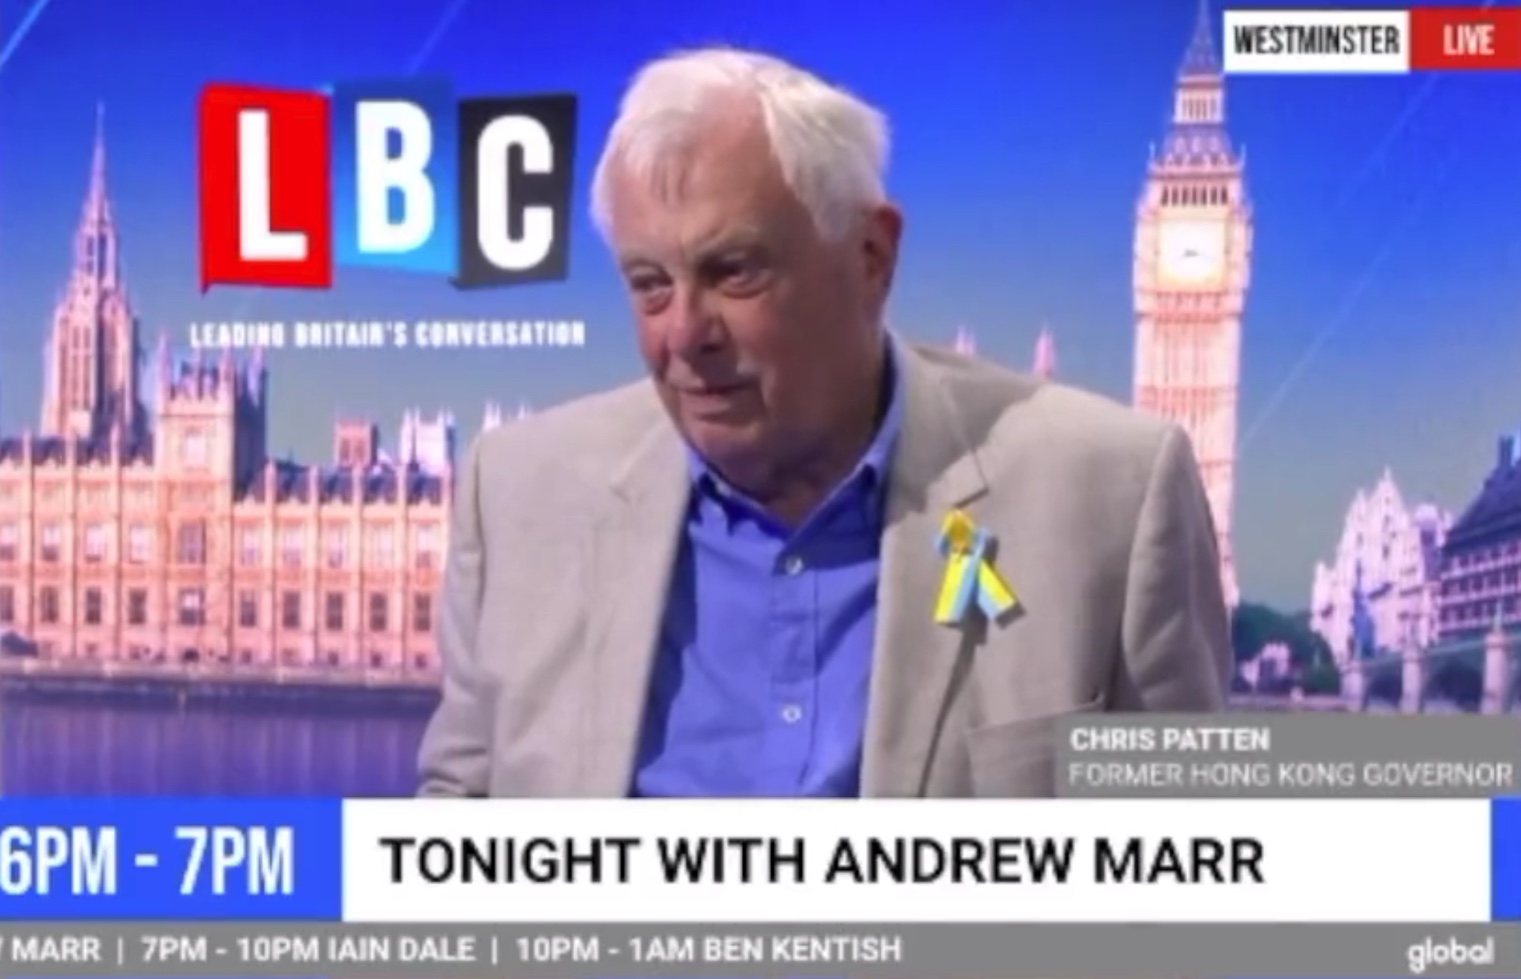 Former Conservative Party chair says a Boris Johnson general election victory would be ‘disaster’